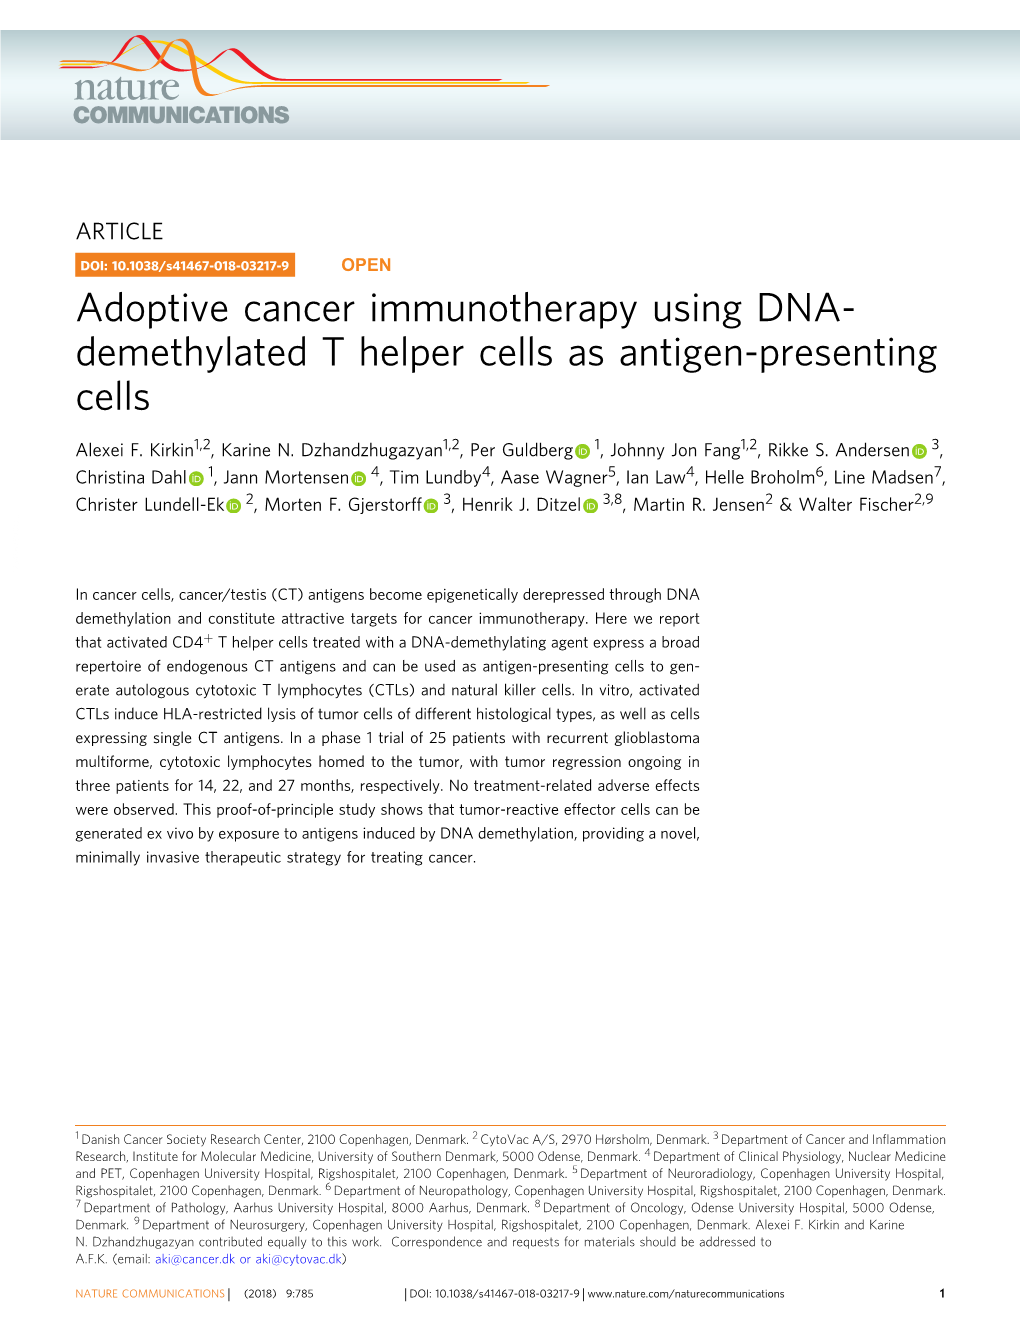 Adoptive Cancer Immunotherapy Using DNA-Demethylated T Helper Cells